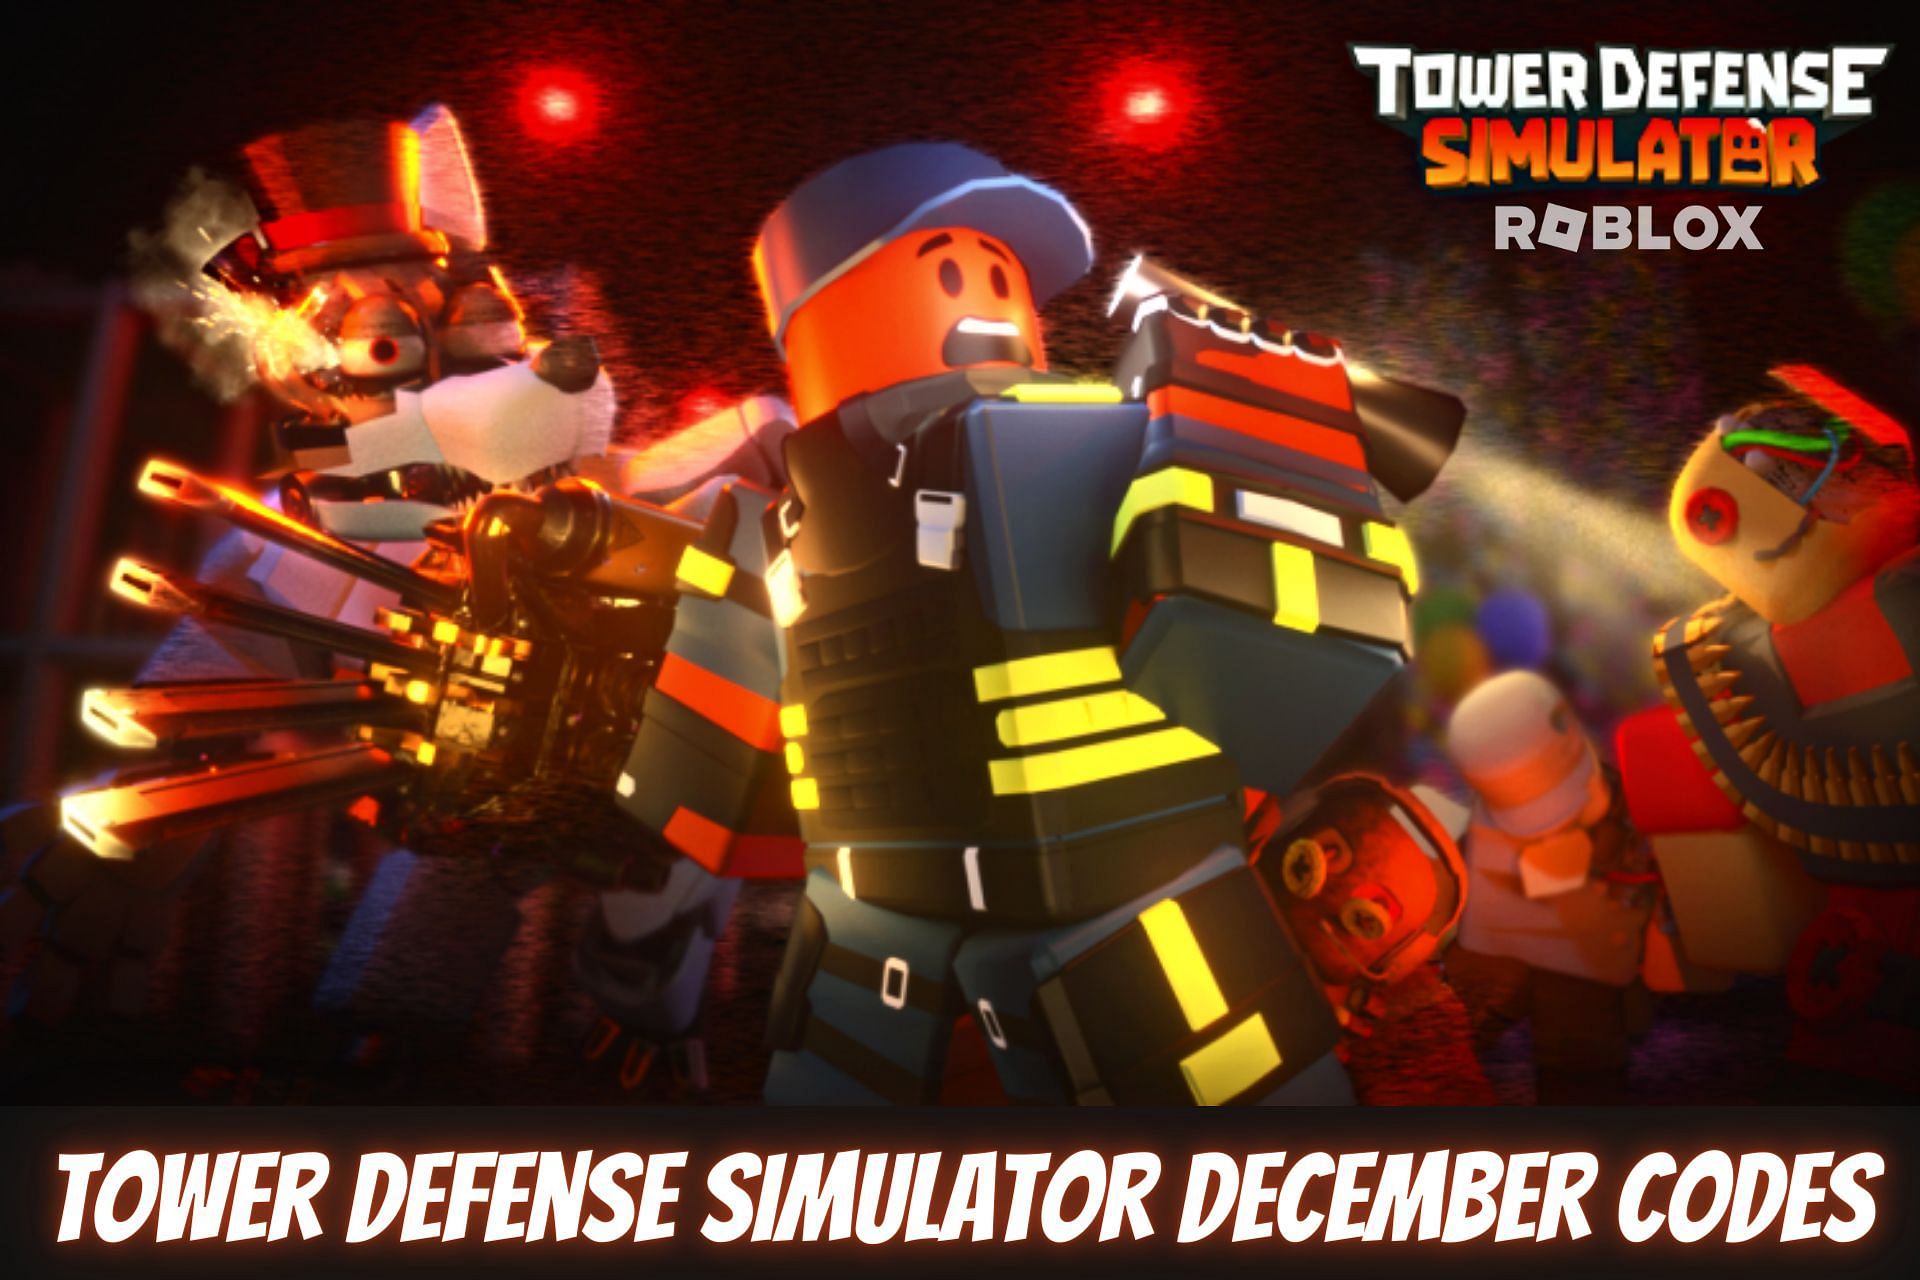 NEW UPDATE CODES [EVENT] All Star Tower Defense ROBLOX, LIMITED TIME CODES